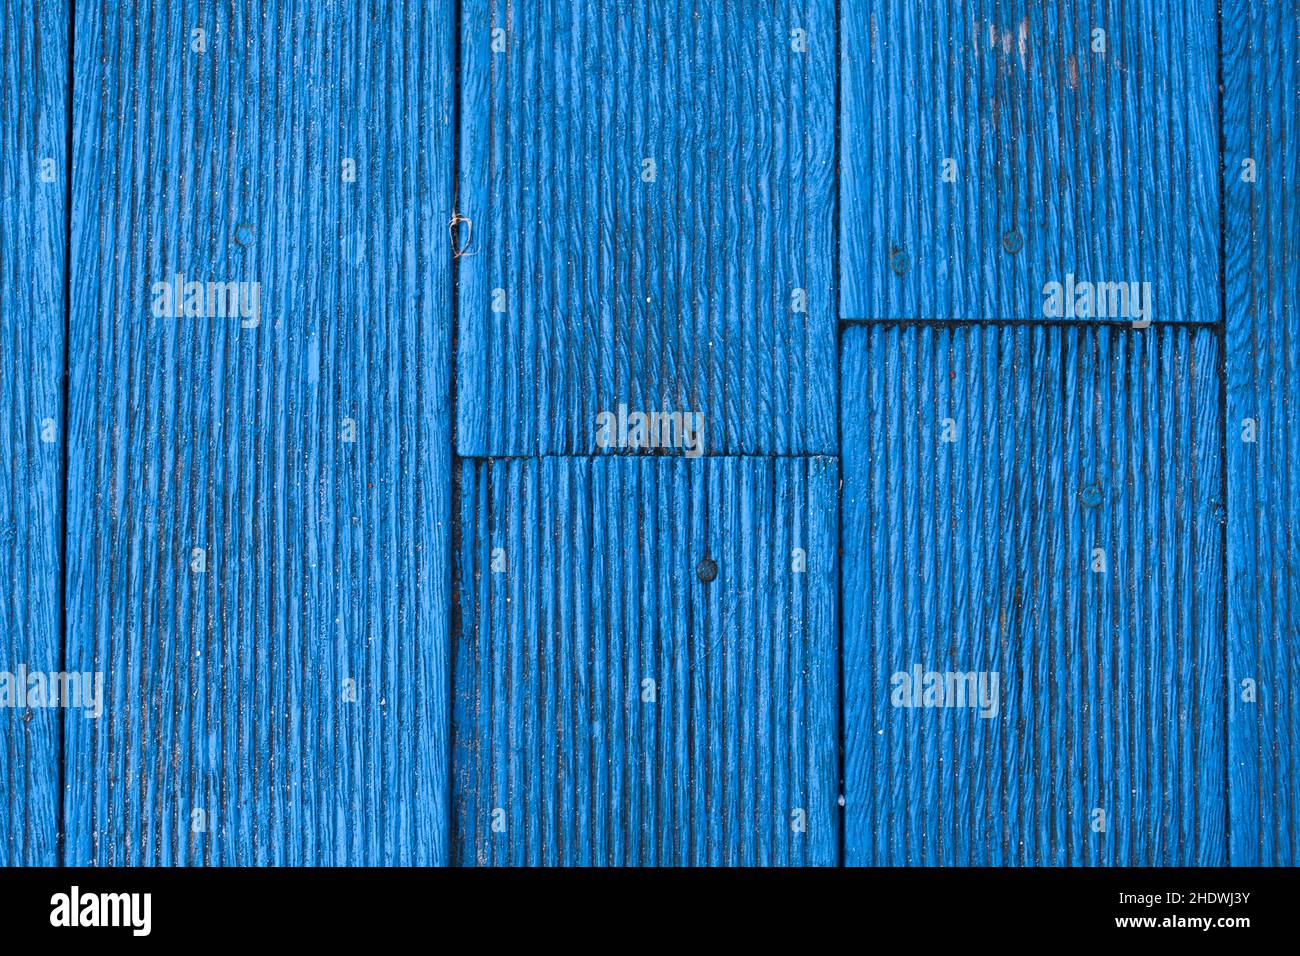 blue, surface, wooden boards, blues, surfaces, wooden board Stock Photo